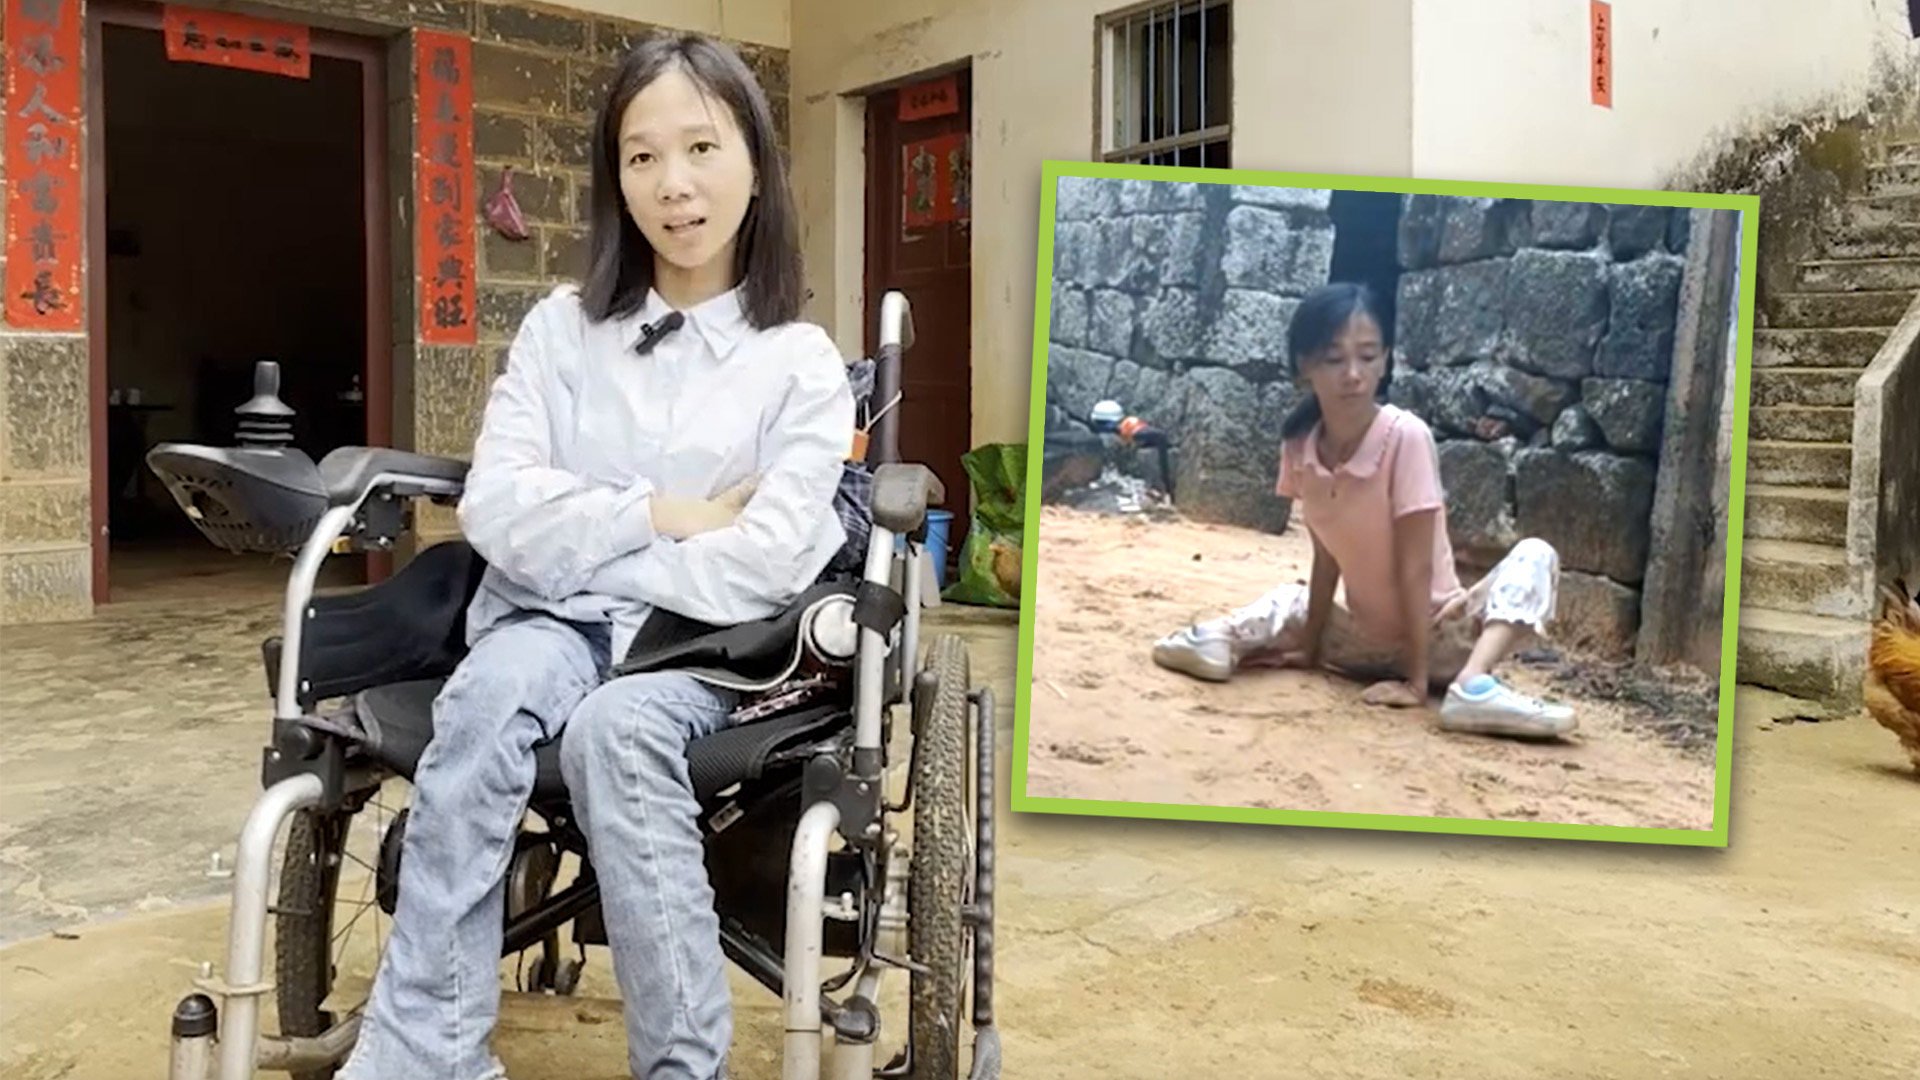 A disabled woman in China has hit back at “hurtful” online abusers who have attacked her for being “selfish” and an “unfit” mother. Photo: SCMP composite/Douyin/The Paper